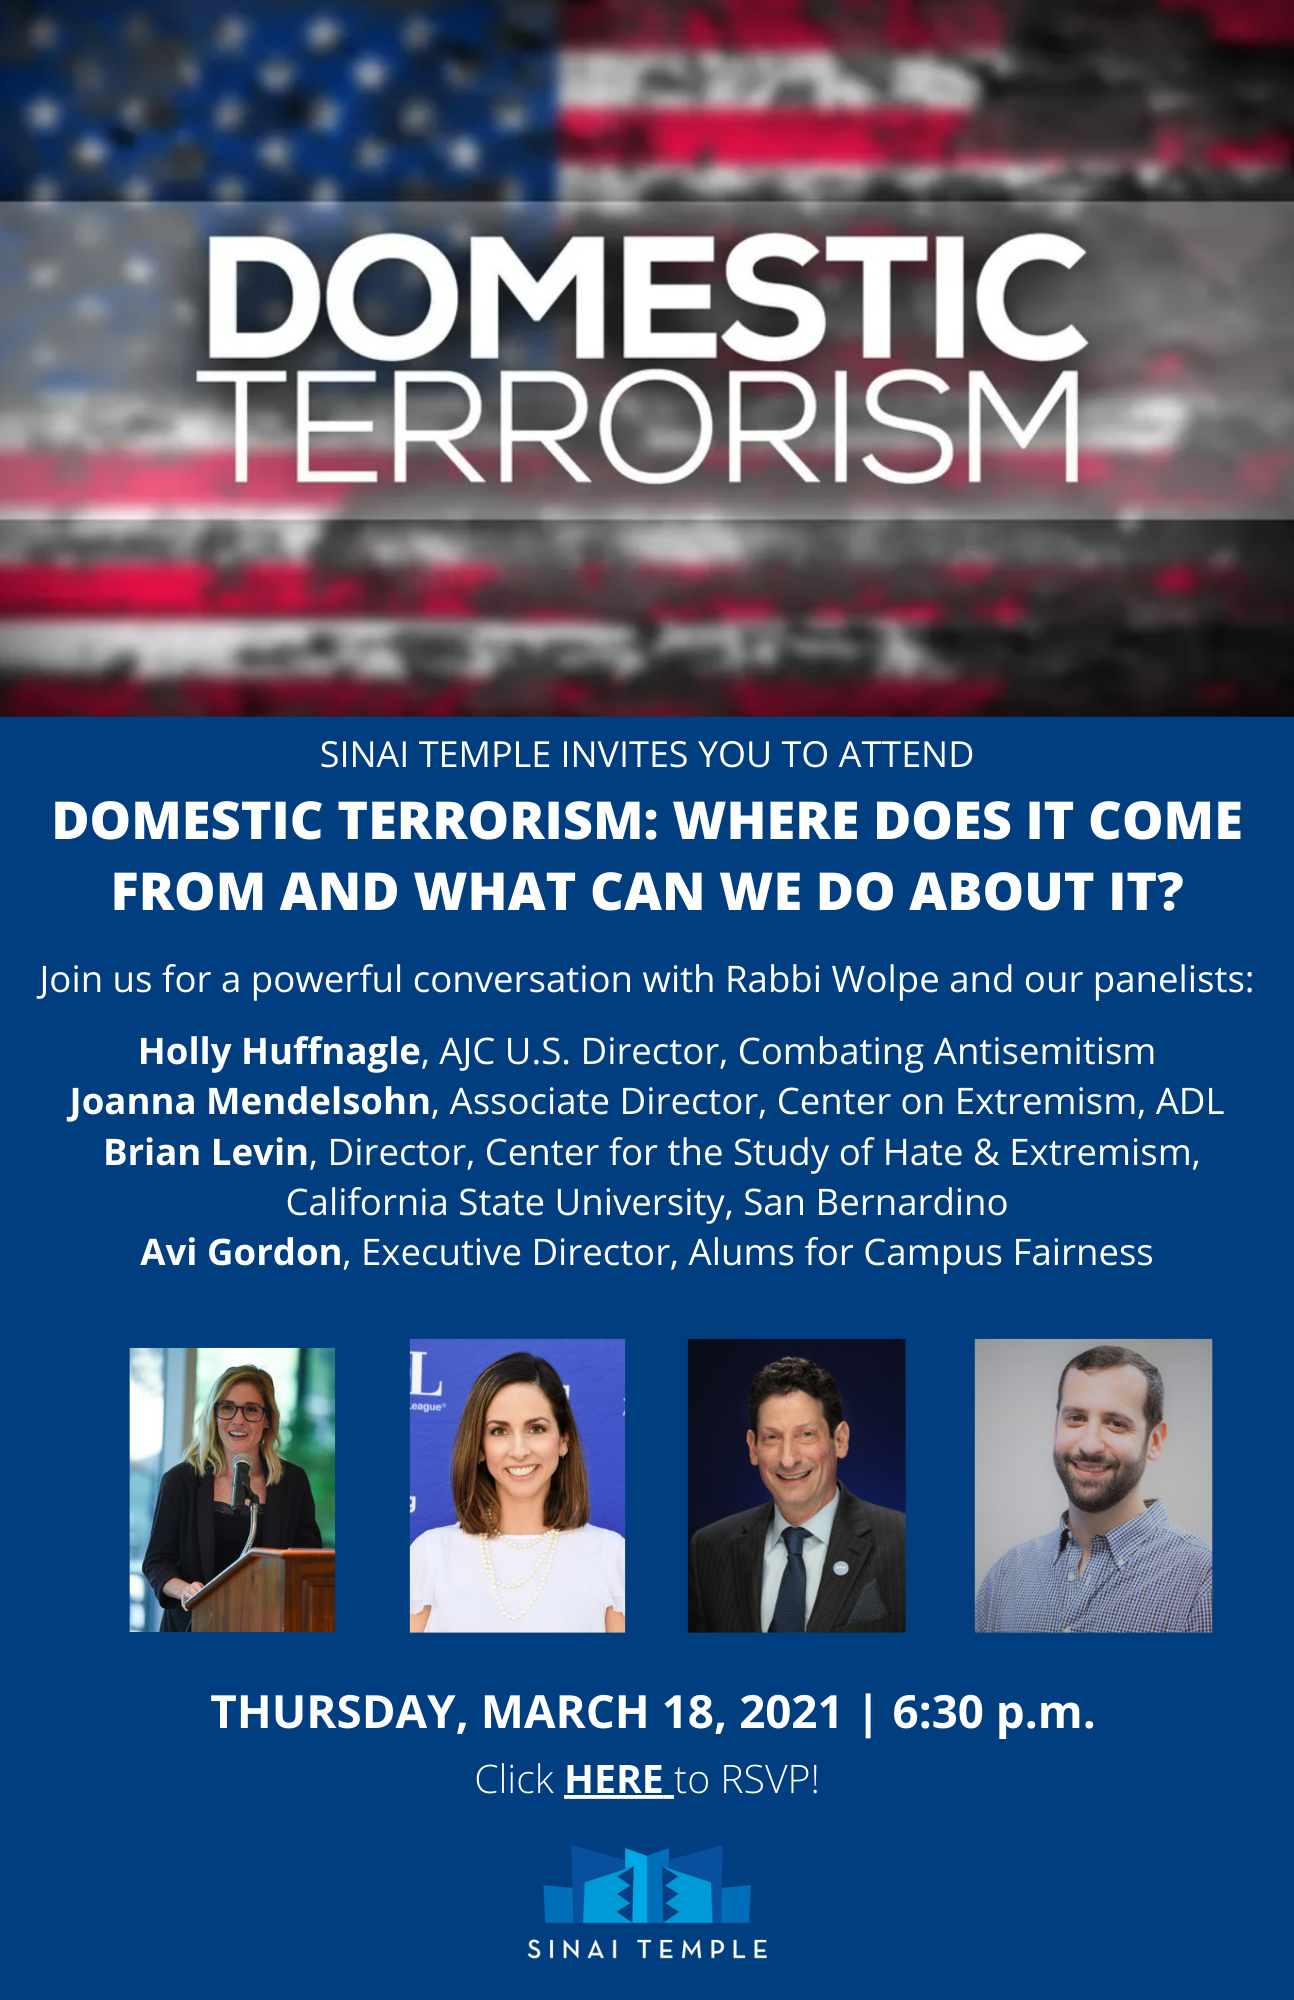 research questions on domestic terrorism